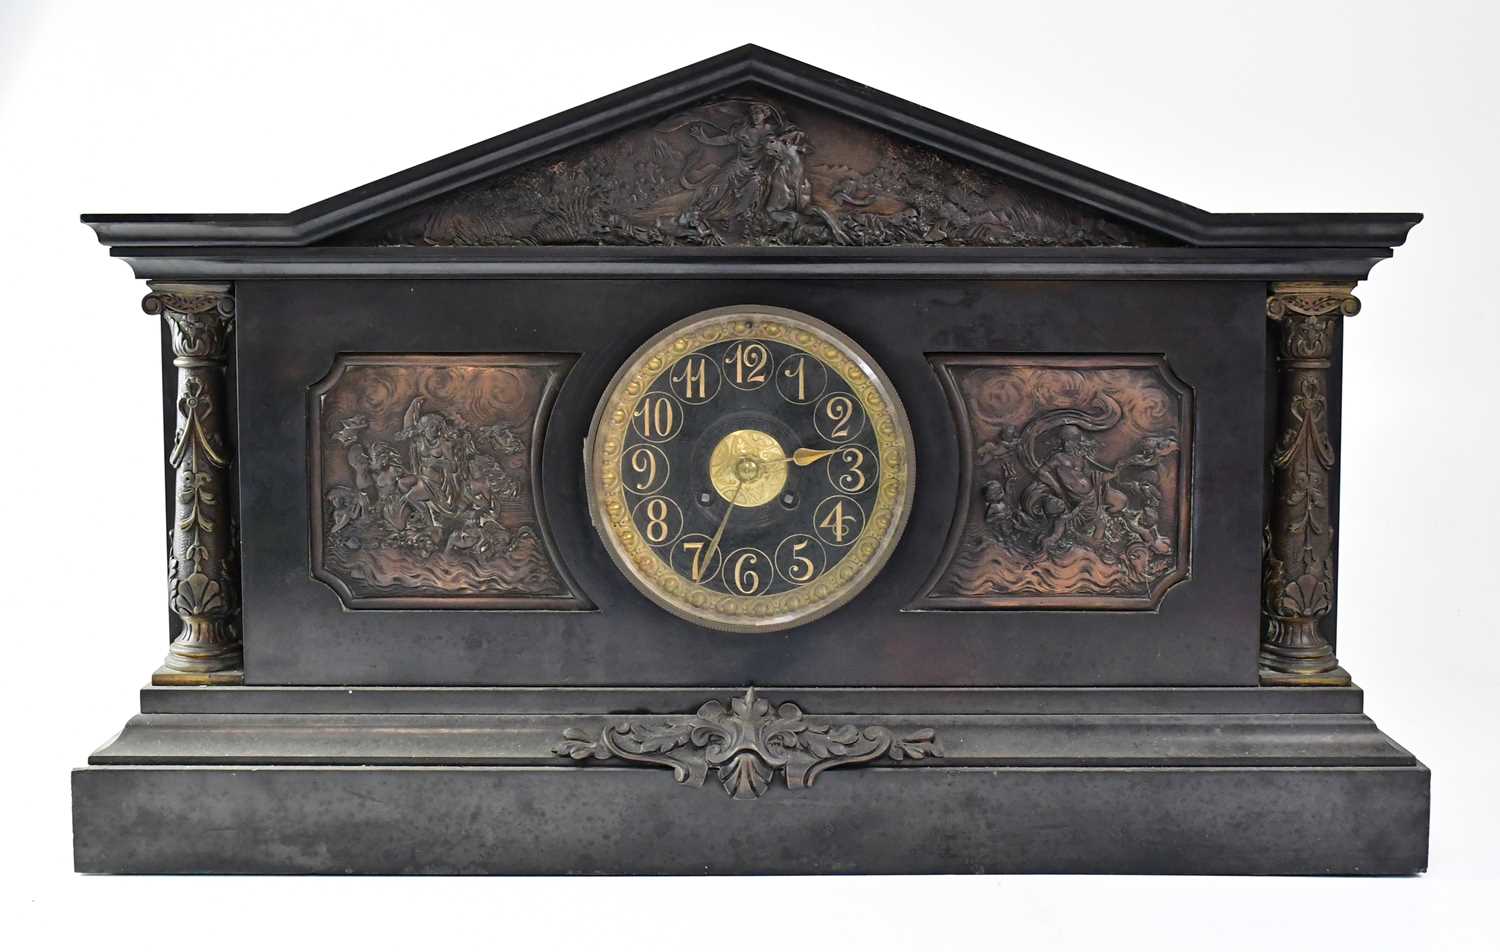 A Victorian slate mausoleum eight-day mantel clock with bronze-effect panels depicting Classical